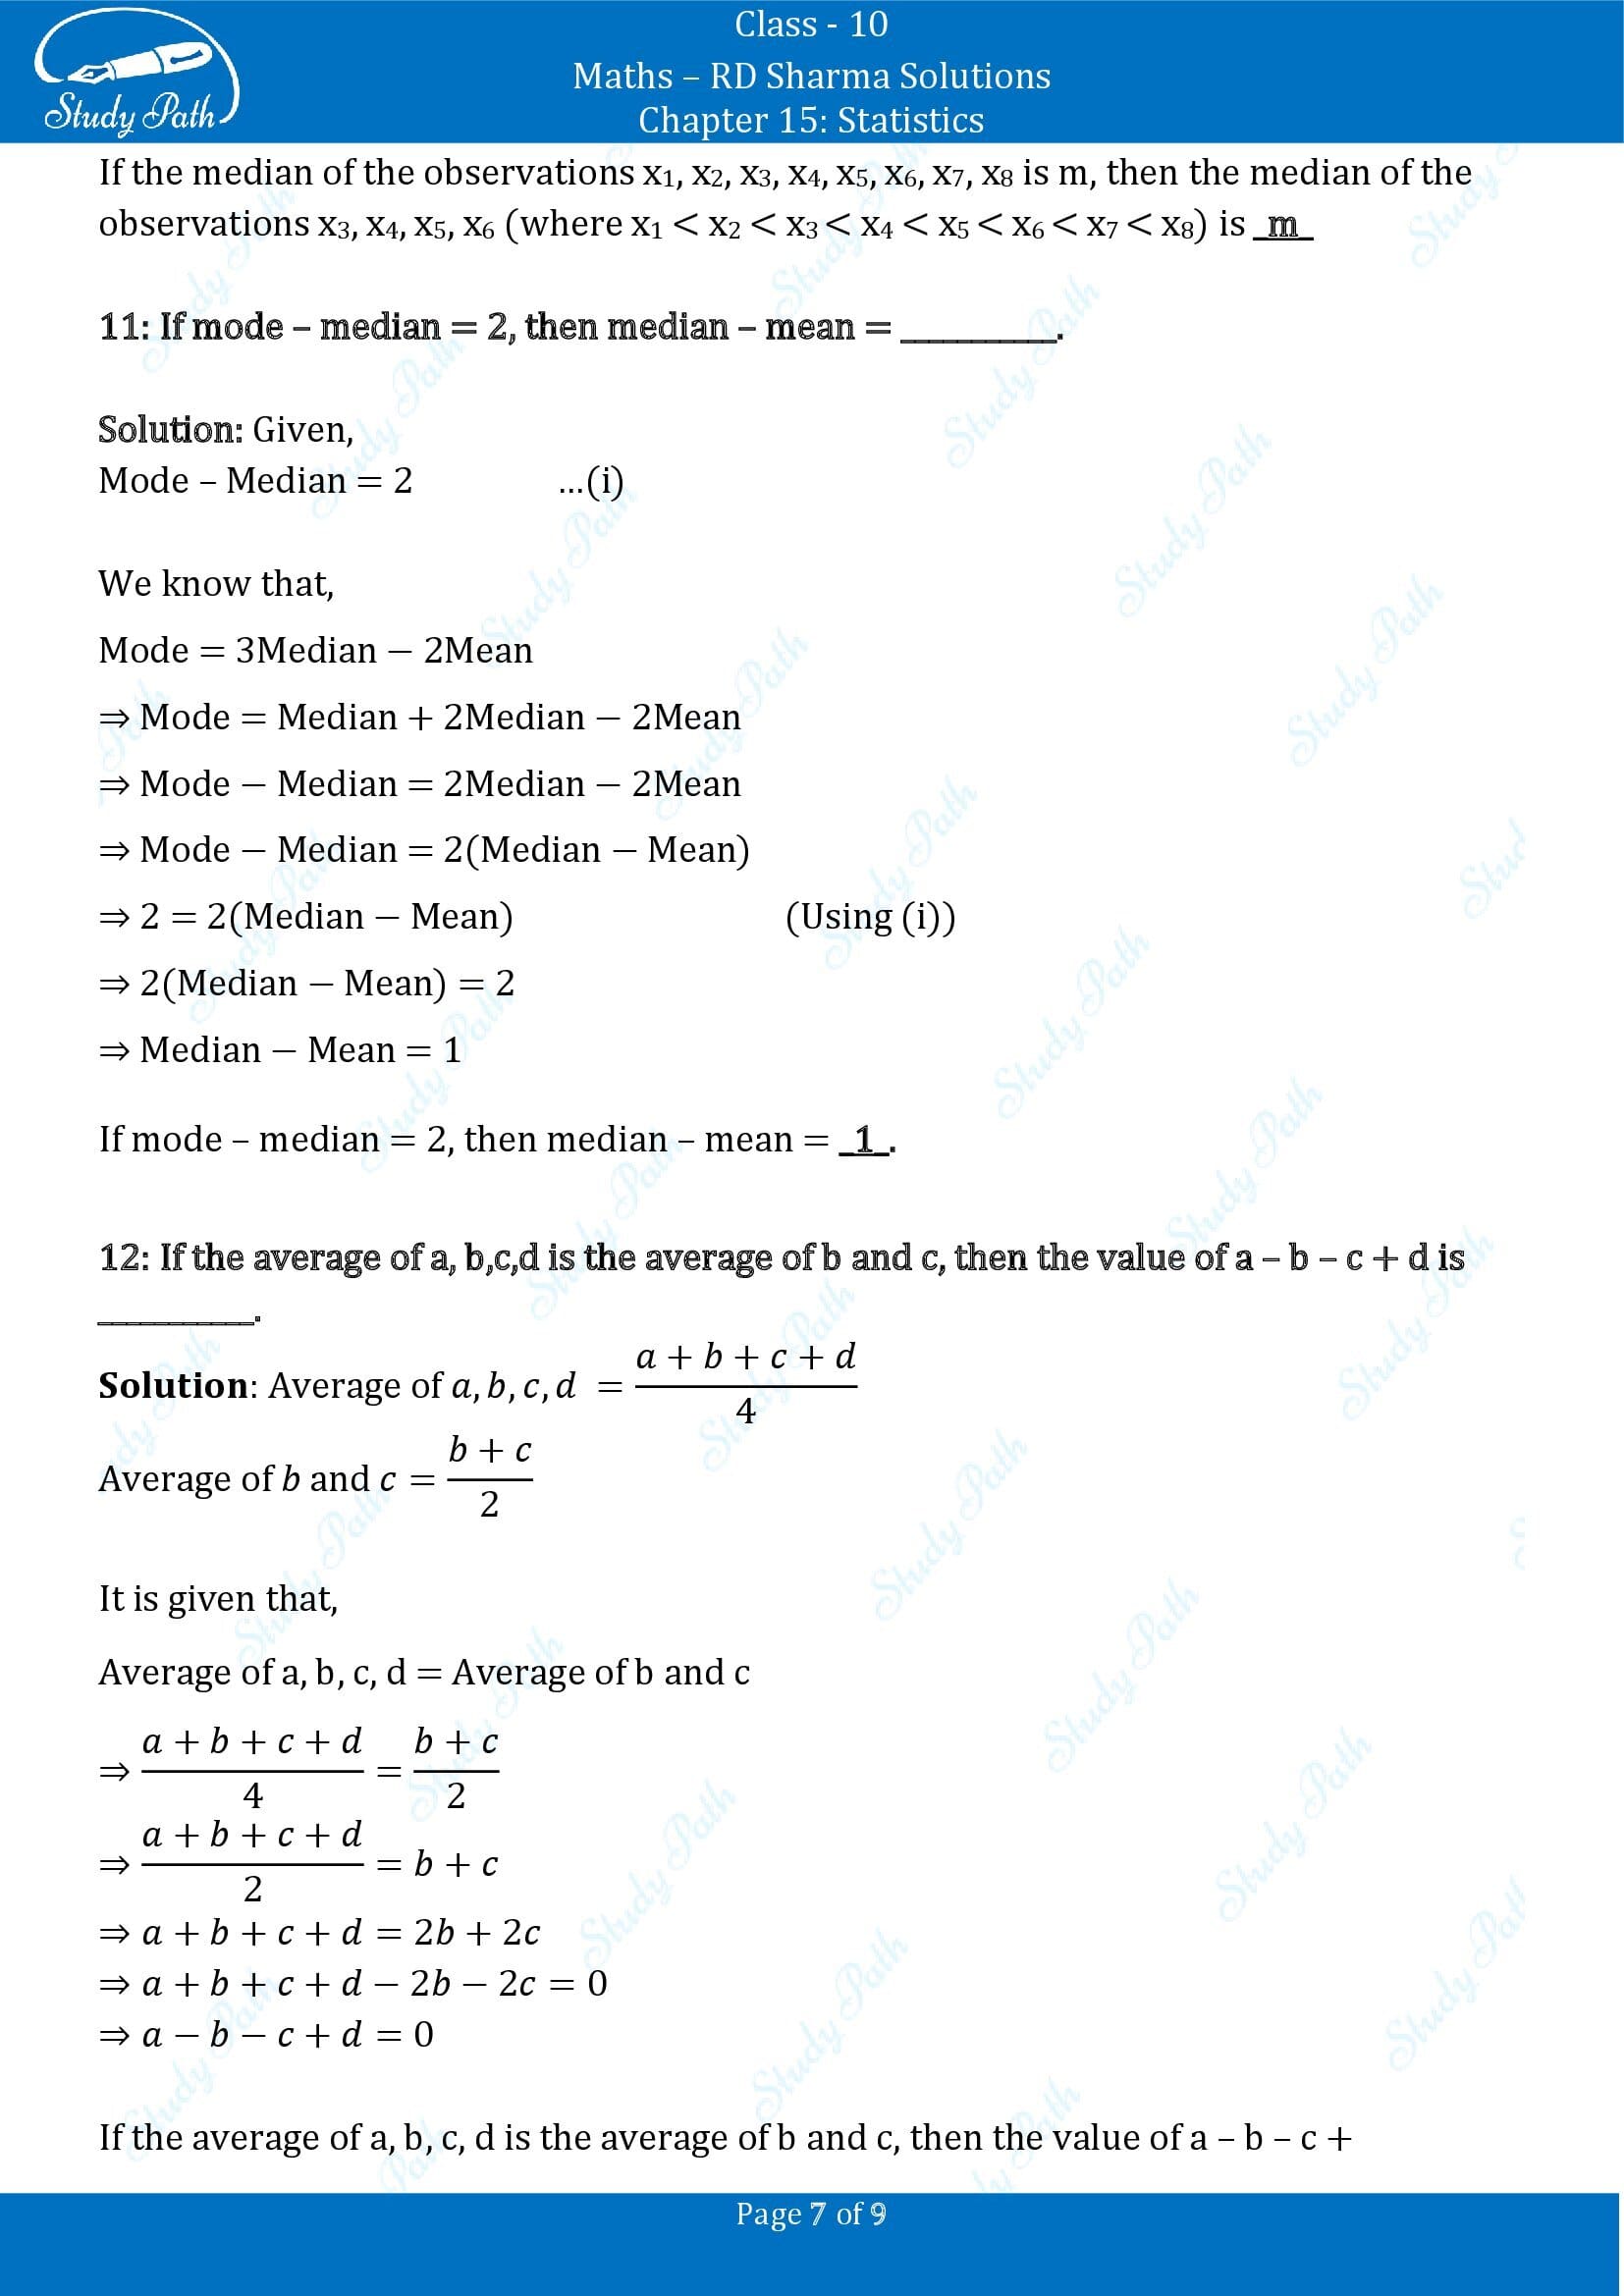 RD Sharma Solutions Class 10 Chapter 15 Statistics Fill in the Blank Type Questions FBQs 00007